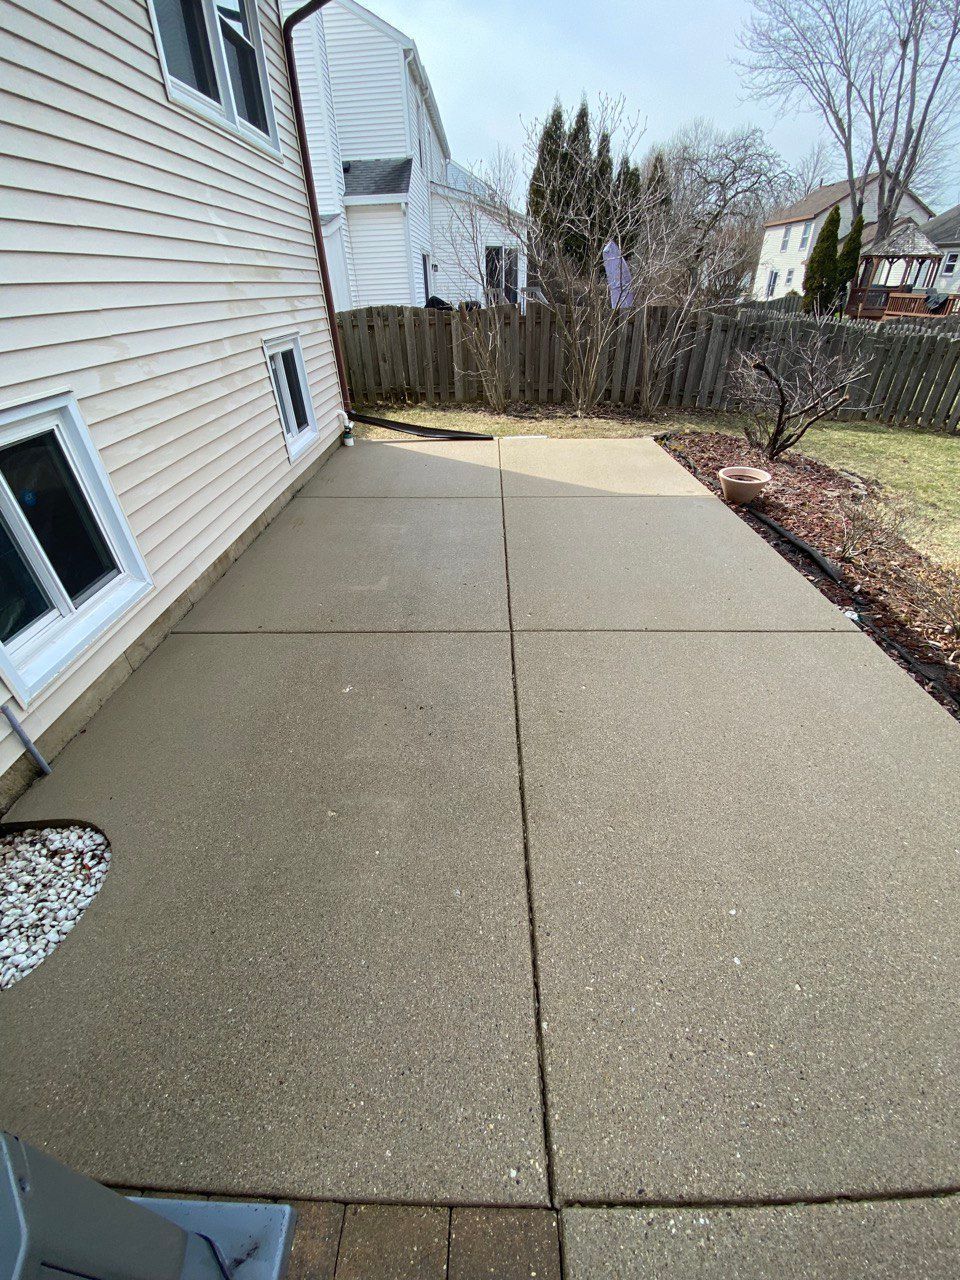 Clean Flooring and Dry - Lake Zurich, IL - Peter’s Power Wash Services